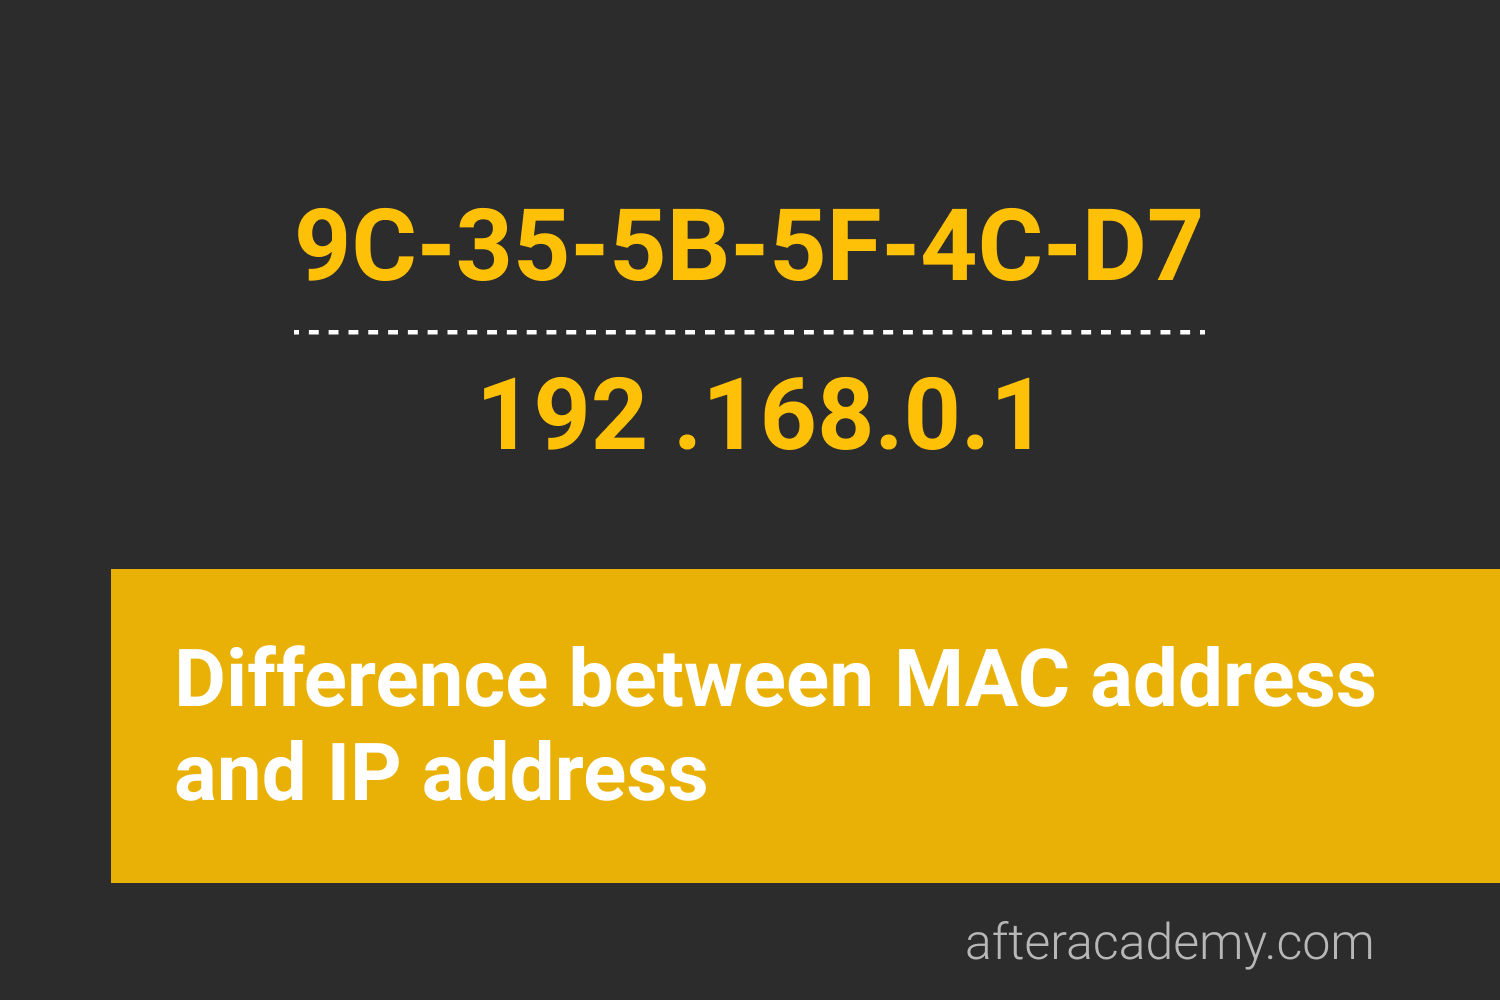 What is the difference between MAC address and IP address?